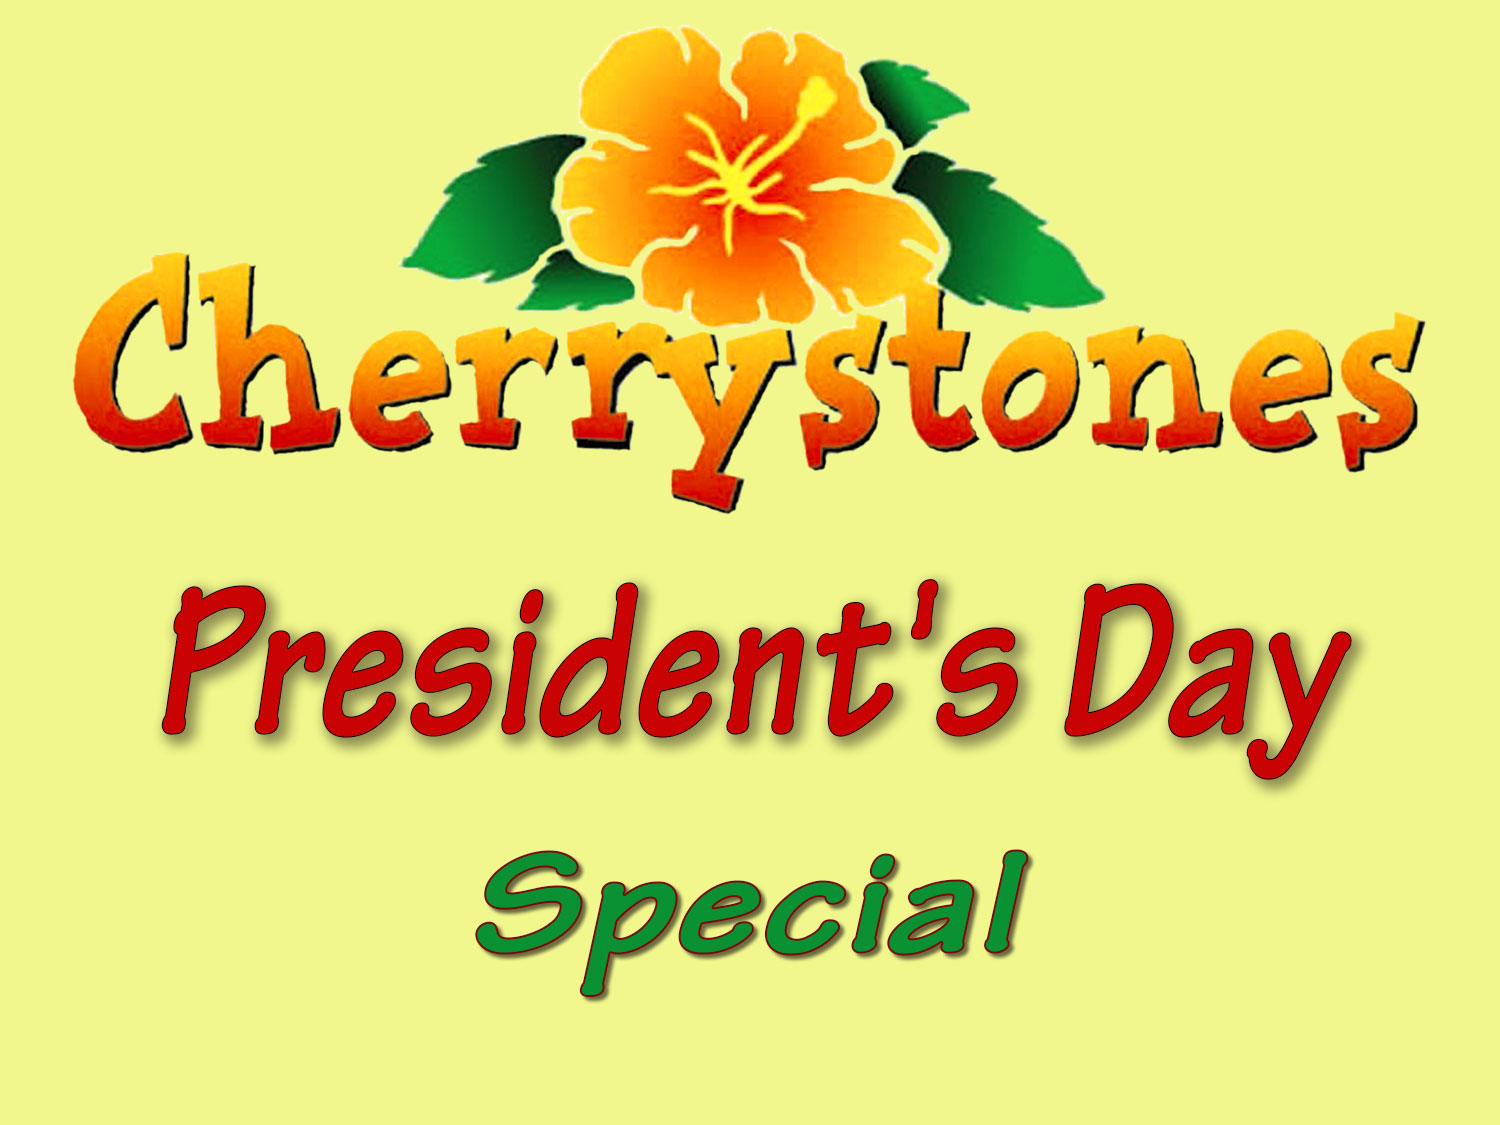 Cherrystone's President's Day Special